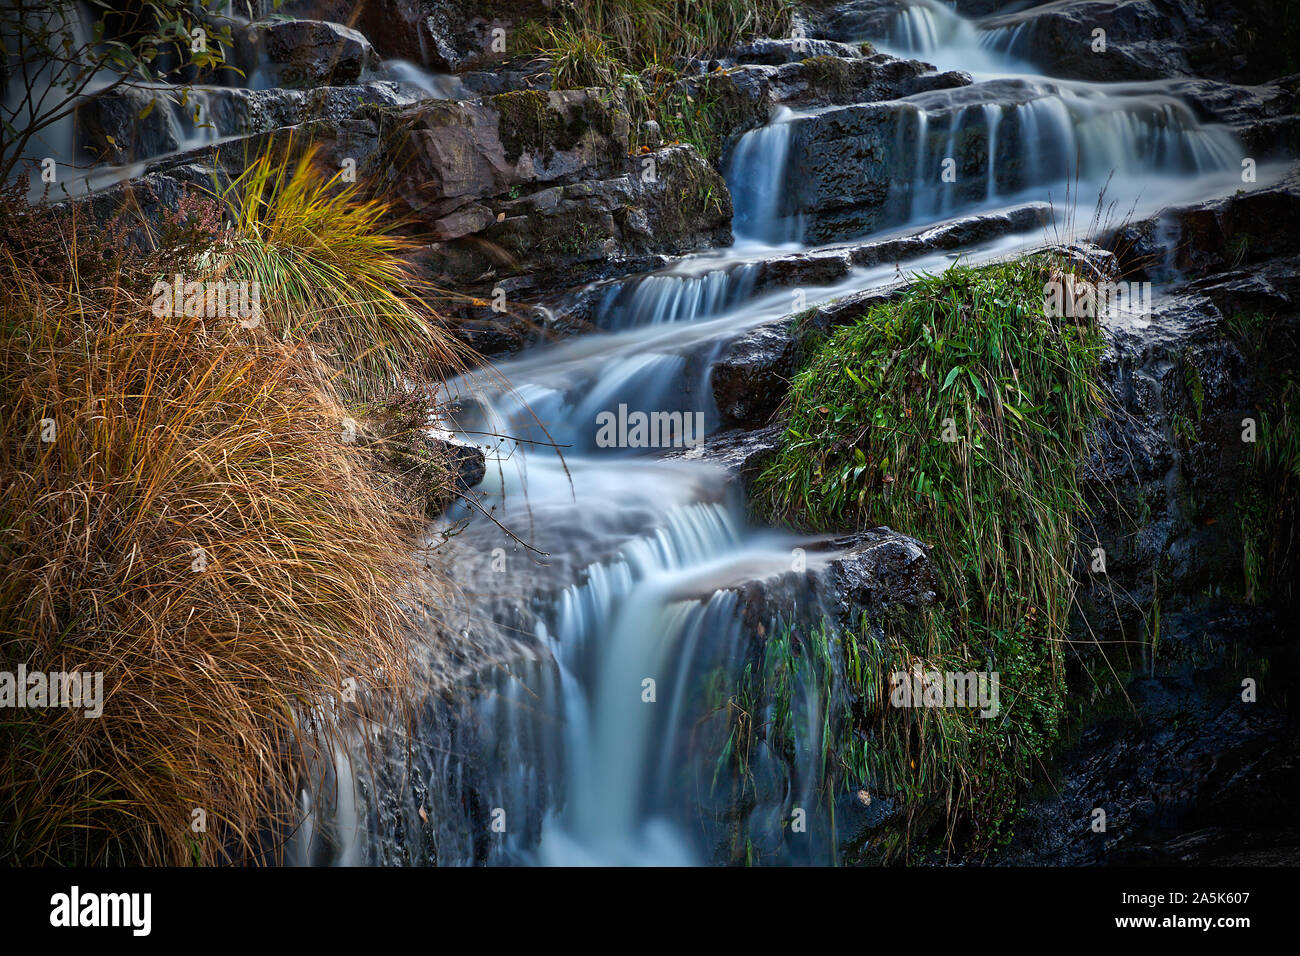 Waterfall cascading over rocks with grasses Stock Photo